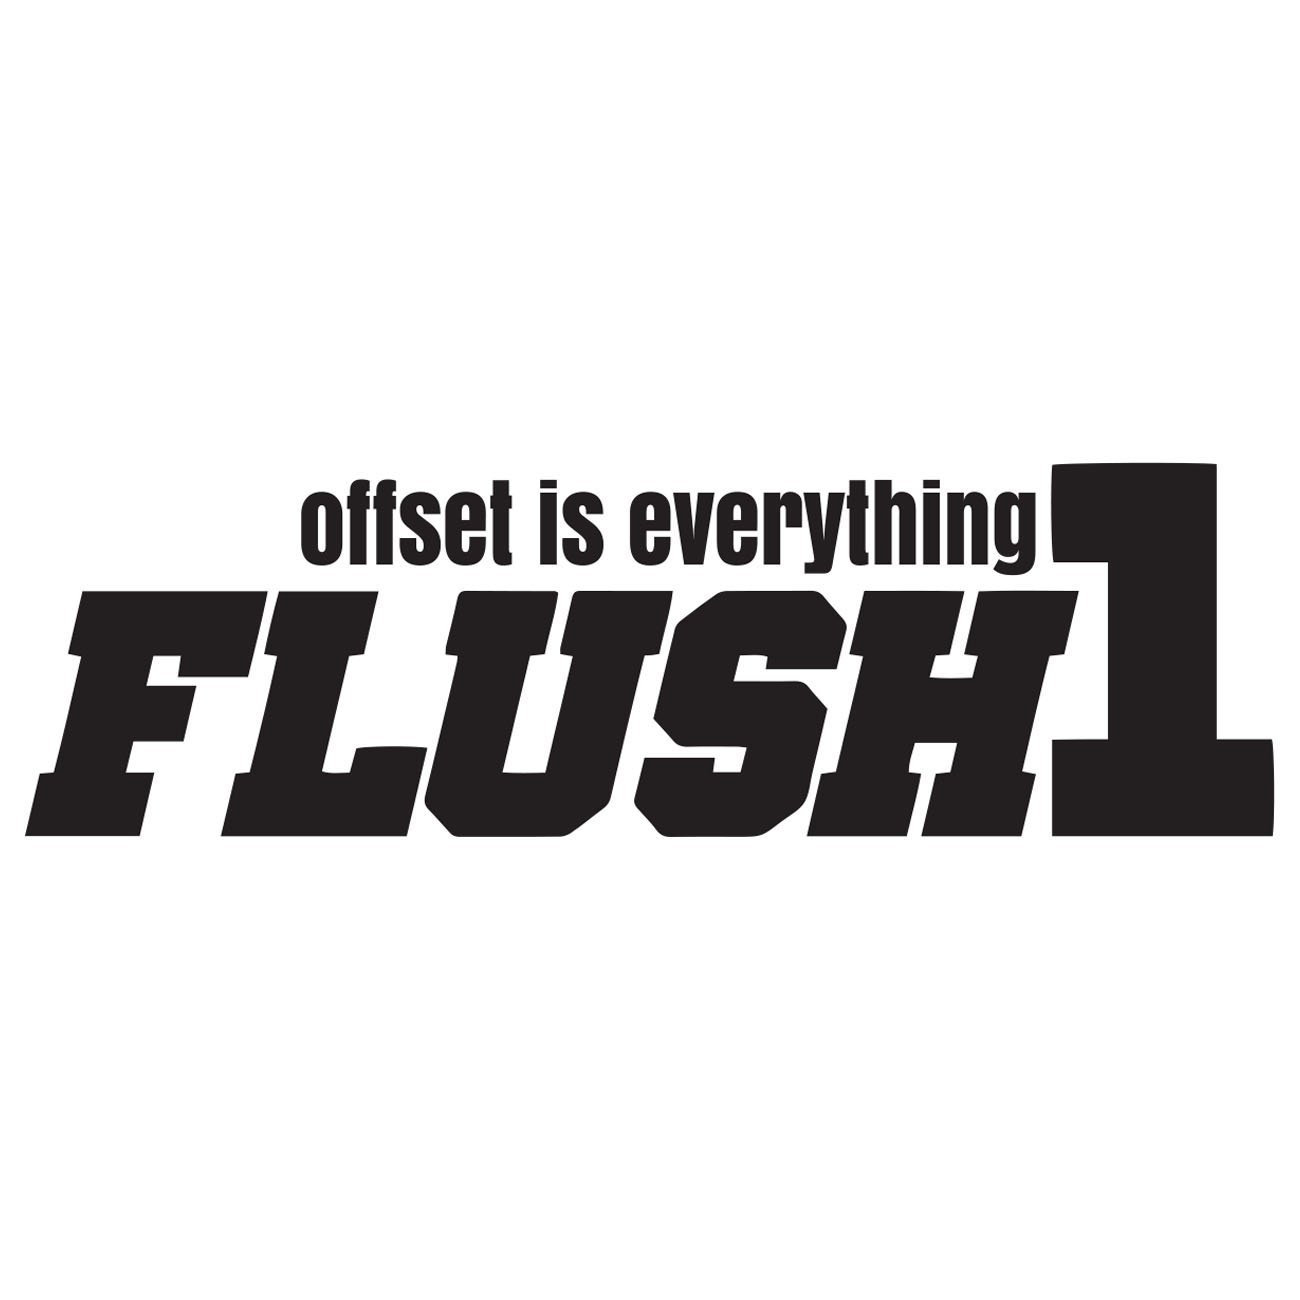 Flush 1 - offset is everything